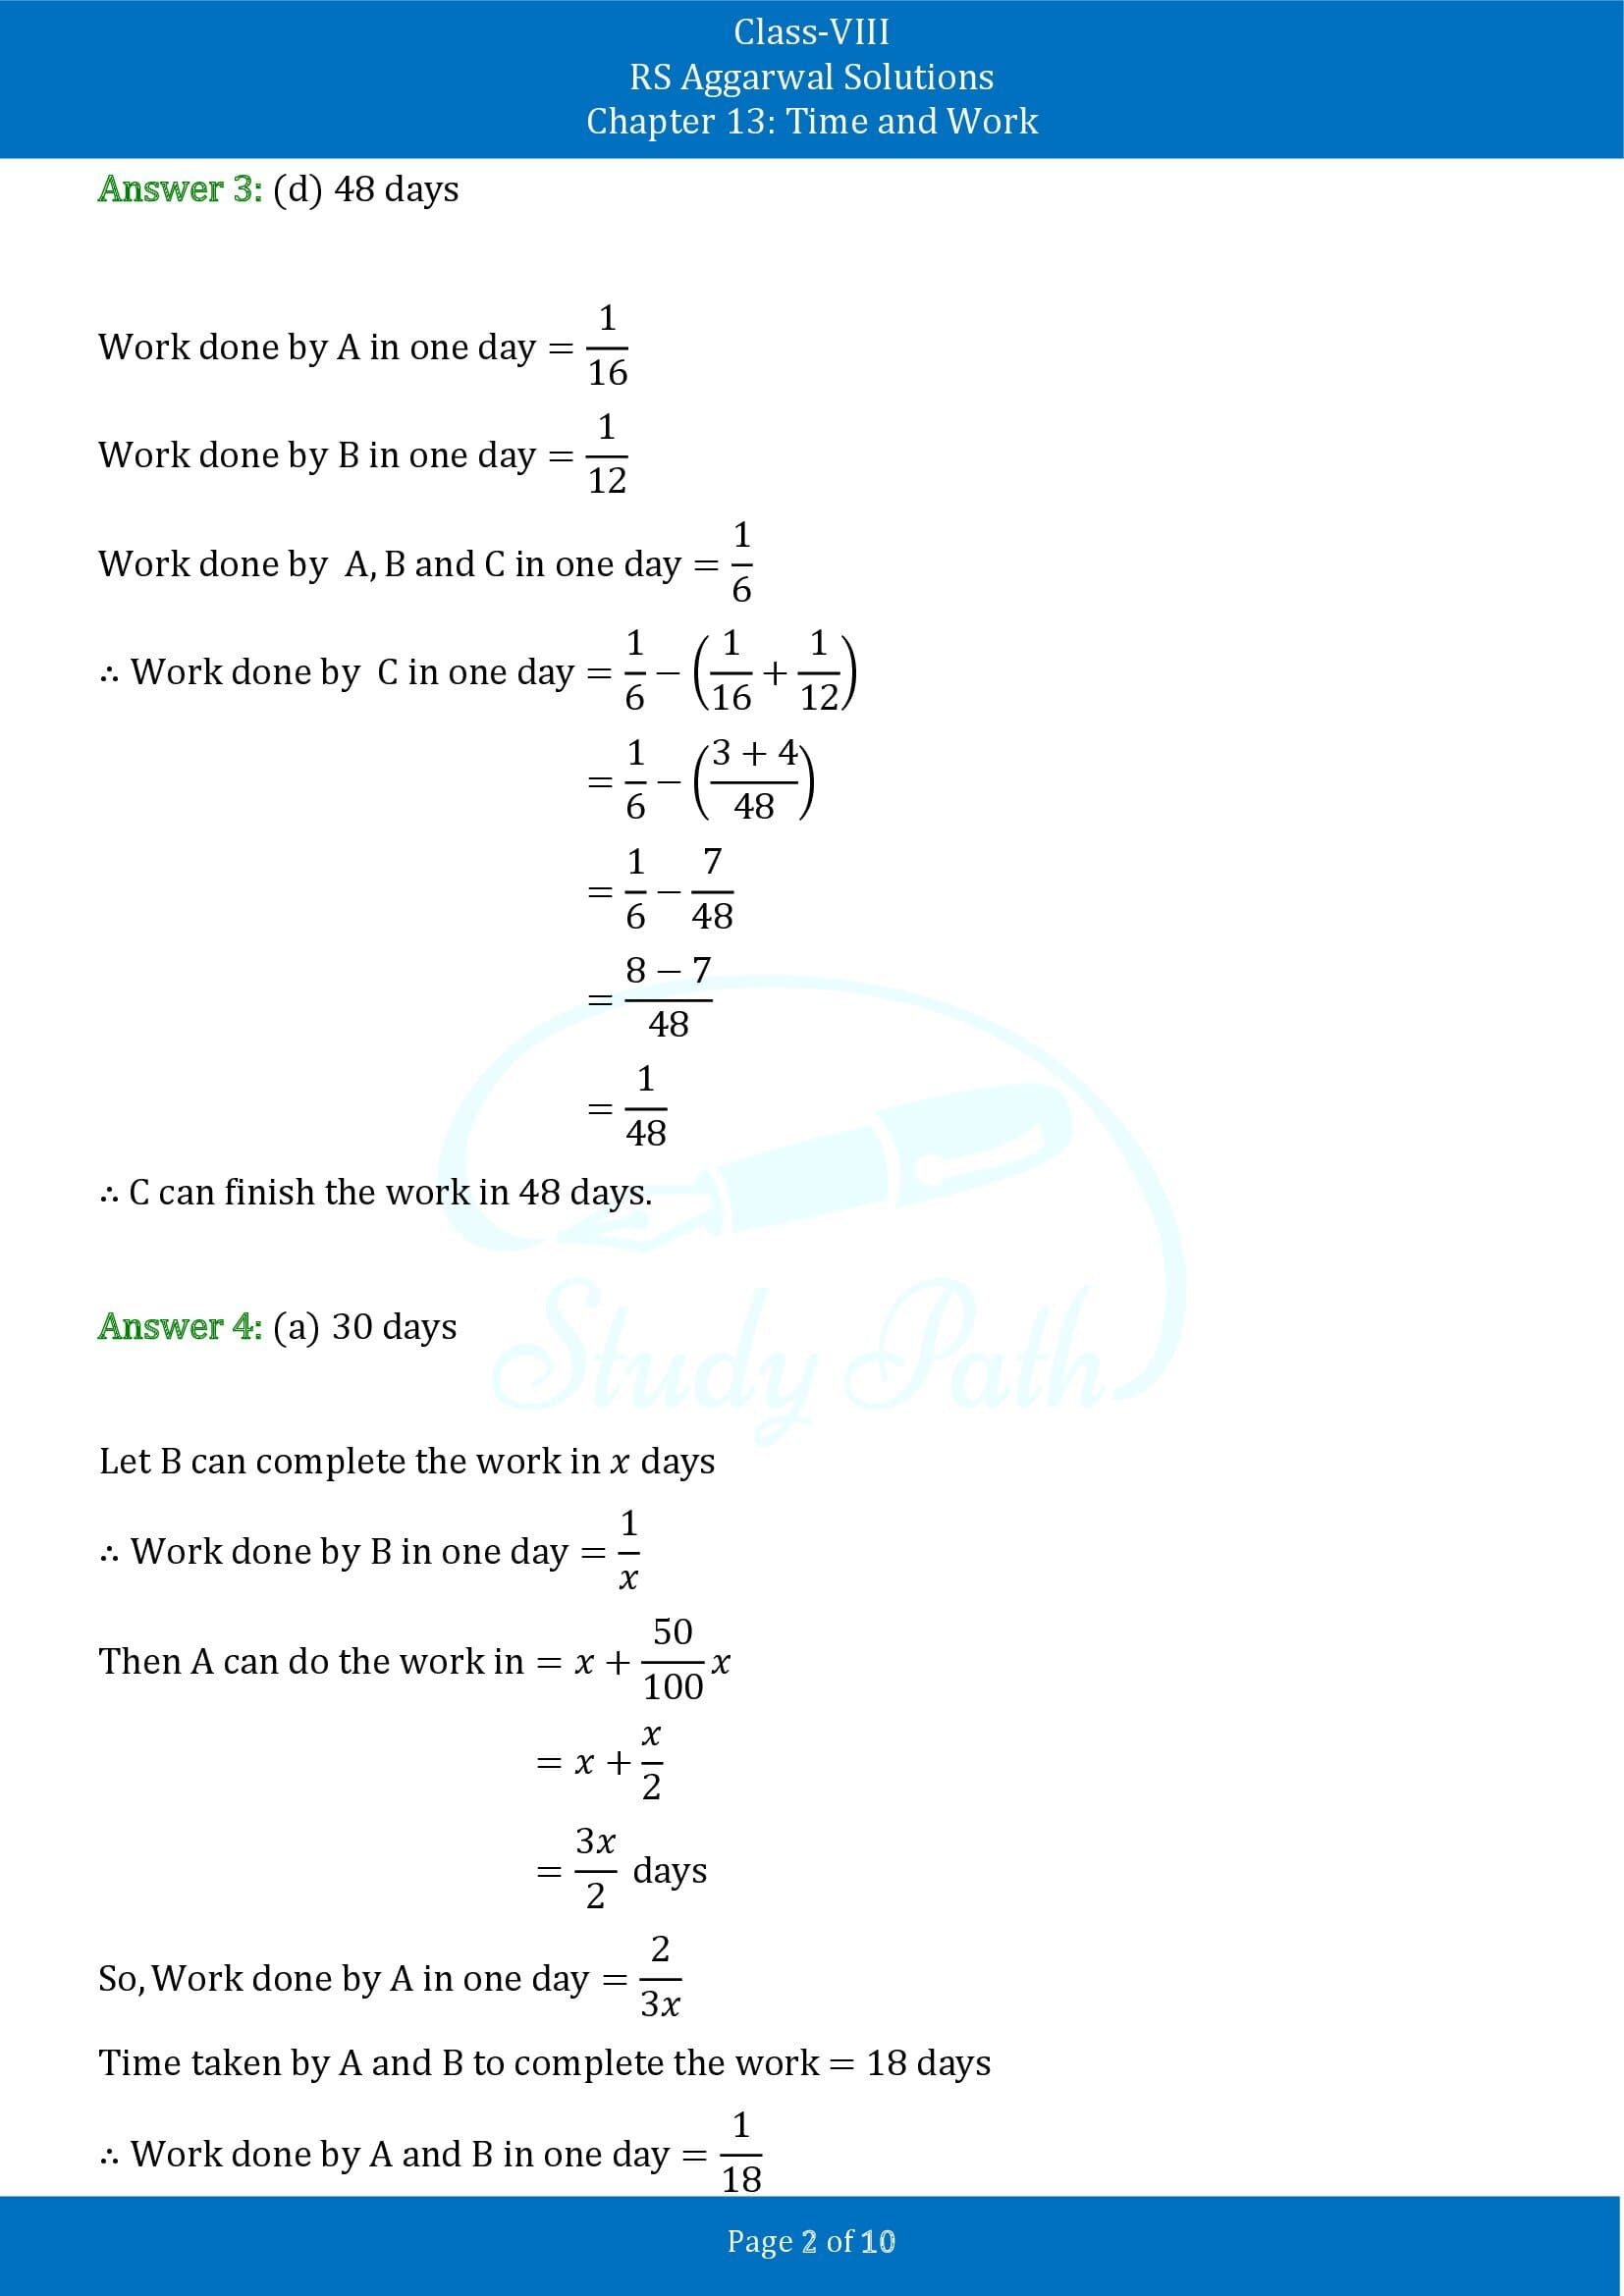 RS Aggarwal Solutions Class 8 Chapter 13 Time and Work Exercise 13B MCQs 00002